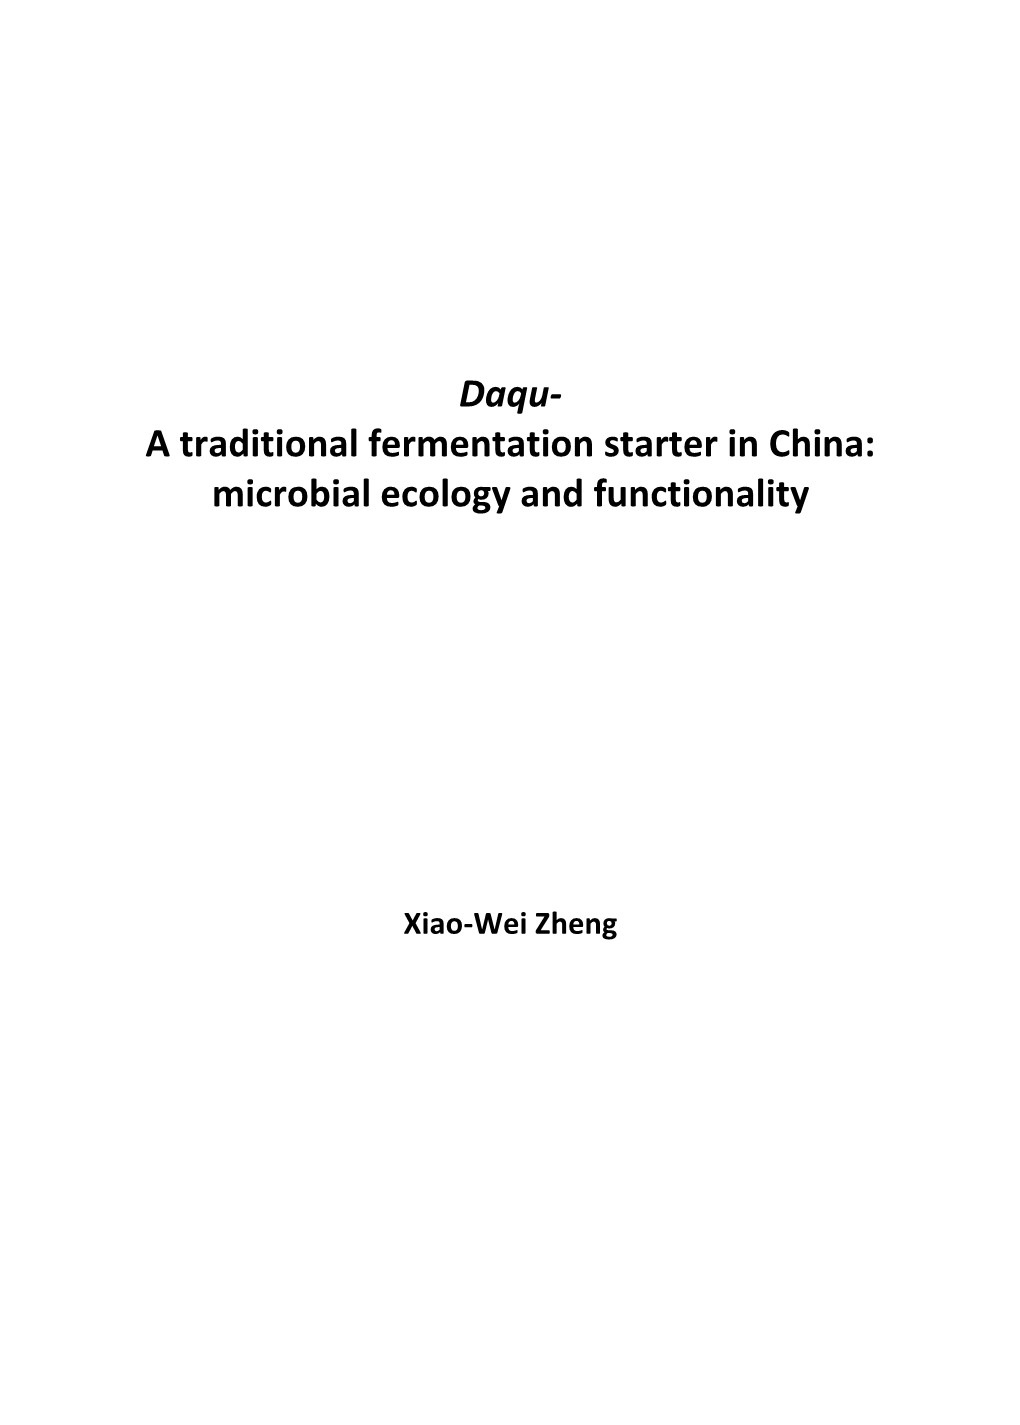 Daqu- a Traditional Fermentation Starter in China: Microbial Ecology and Functionality